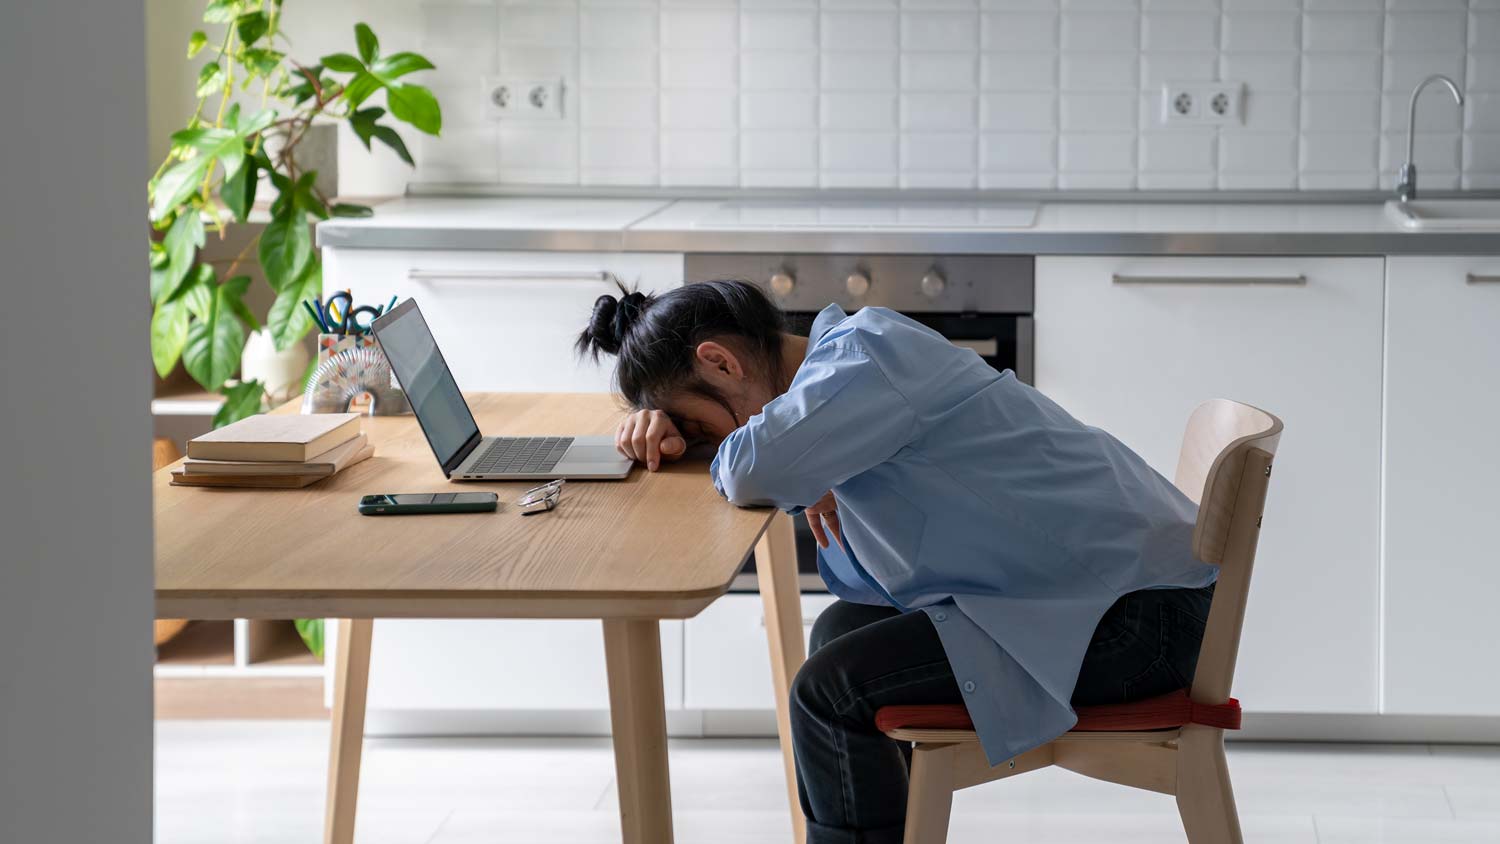 Exhausted freelancer resting head on table